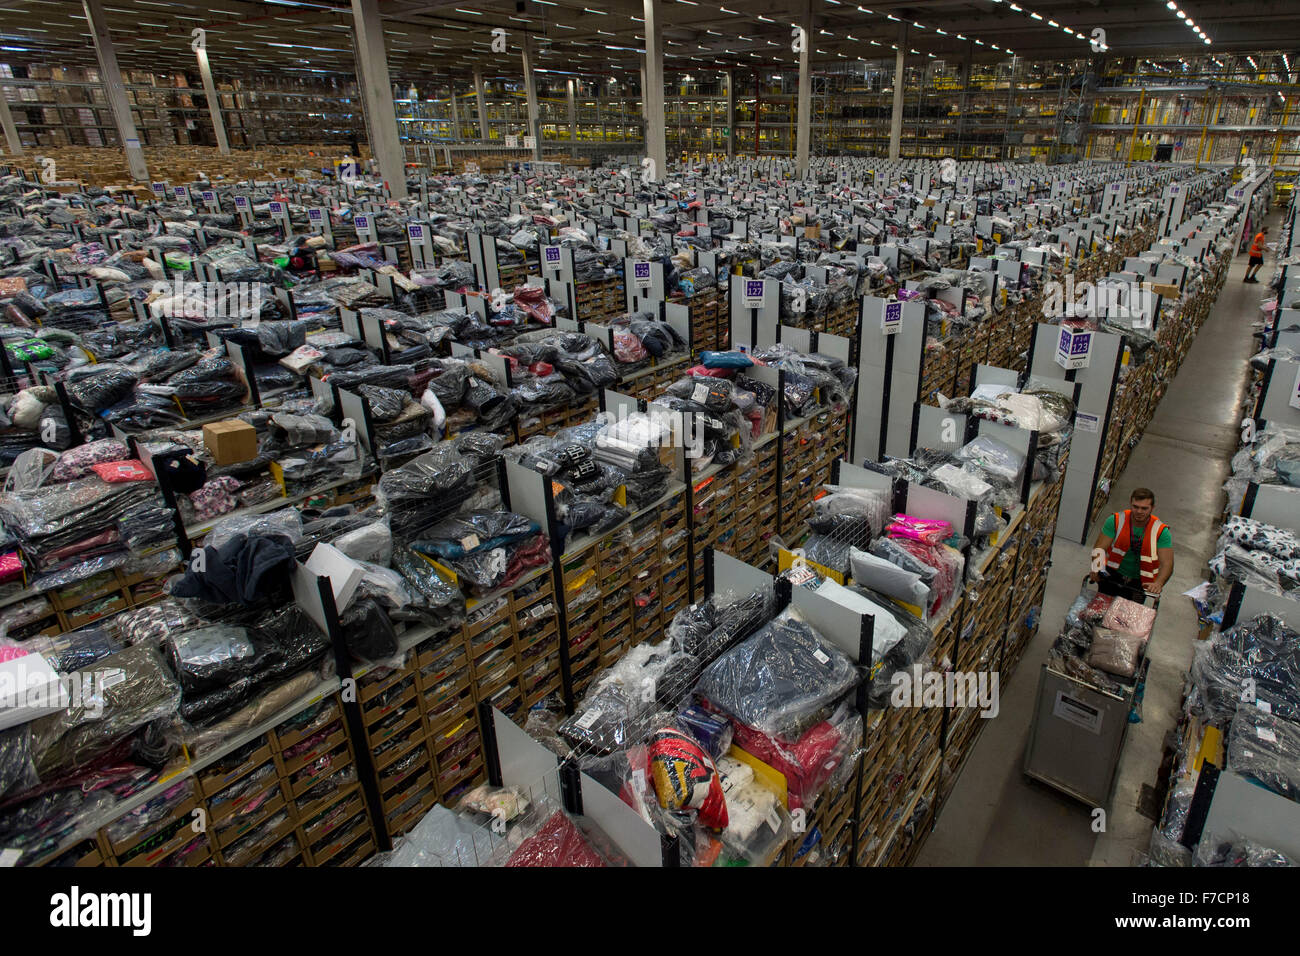 The Amazon warehouse fulfillment centre in Swansea, South Wales. Amazon have hired an number of extra staff for Christmas. Stock Photo